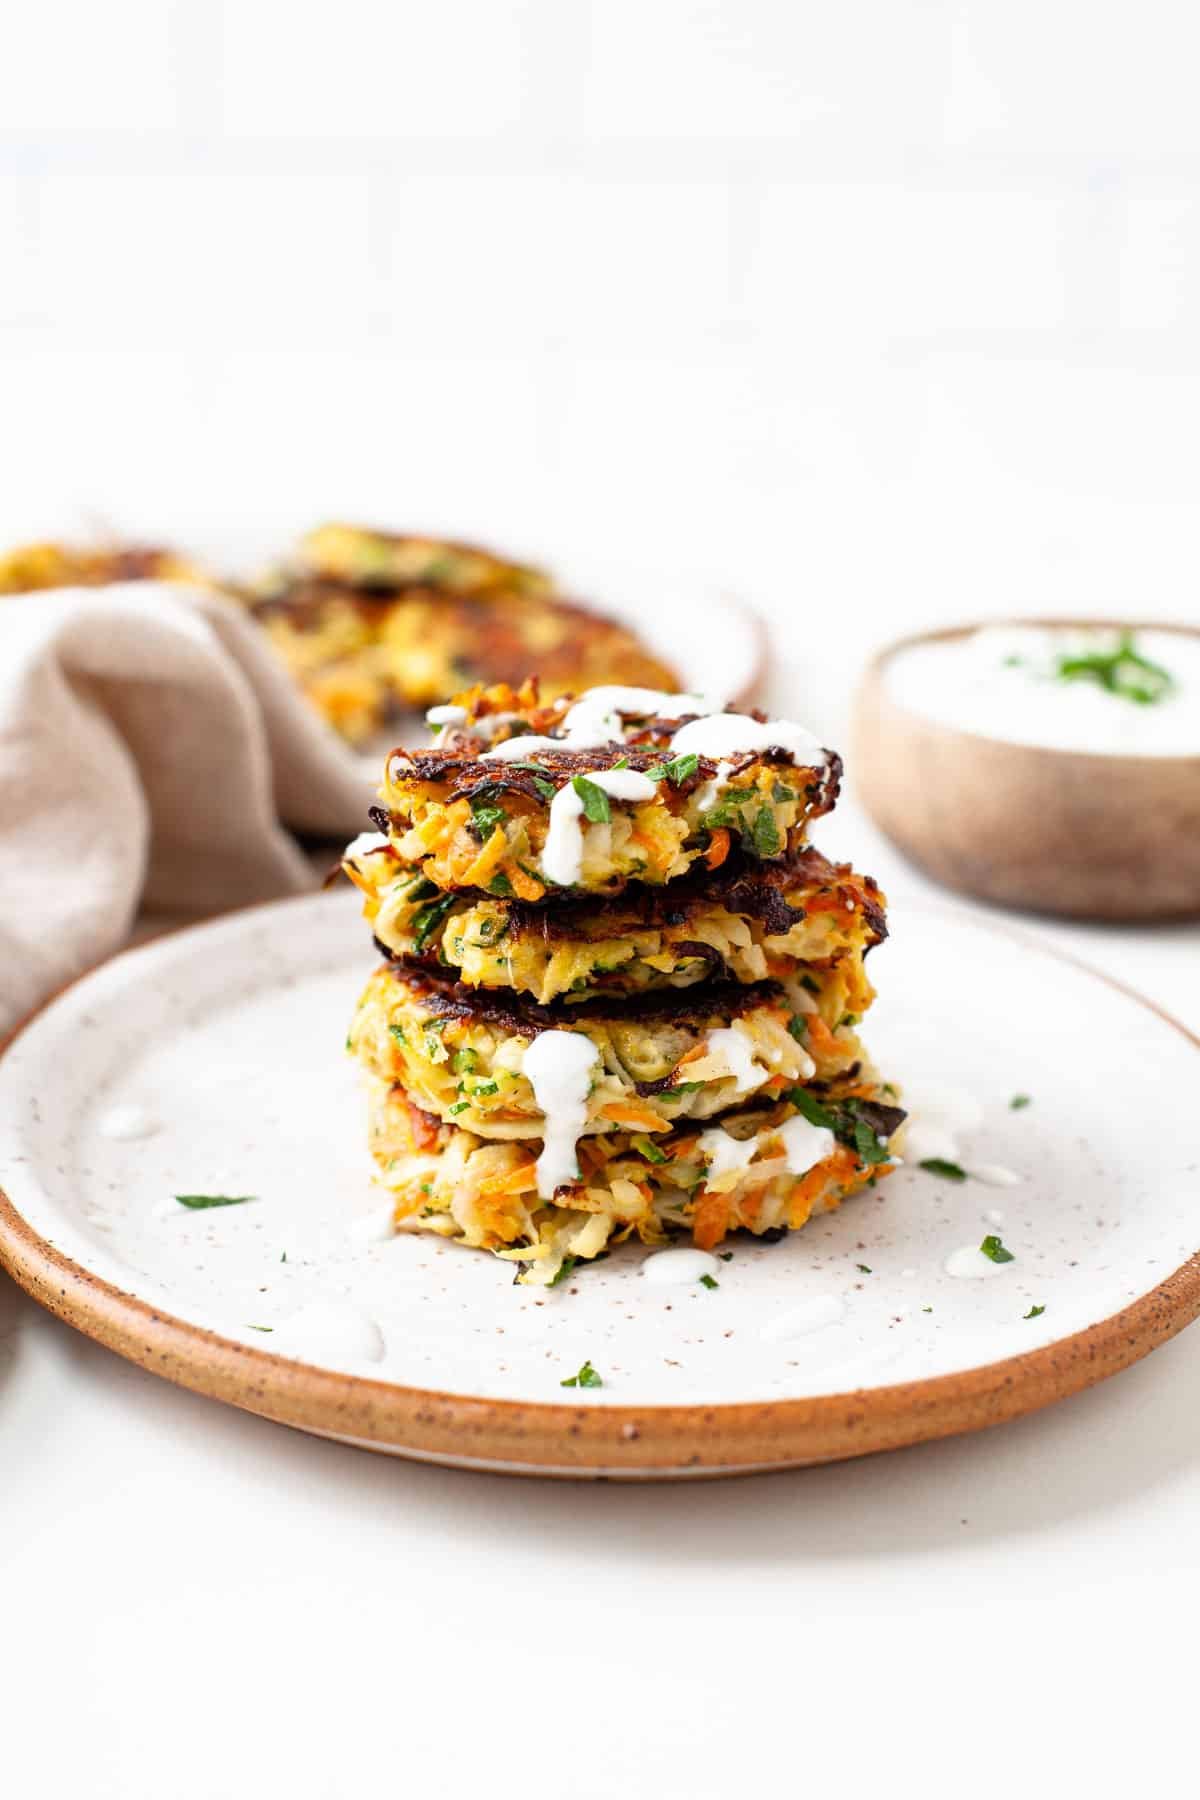 stack of four kohlrabi fritters on speckled plate with herb yogurt sauce drizzled over top